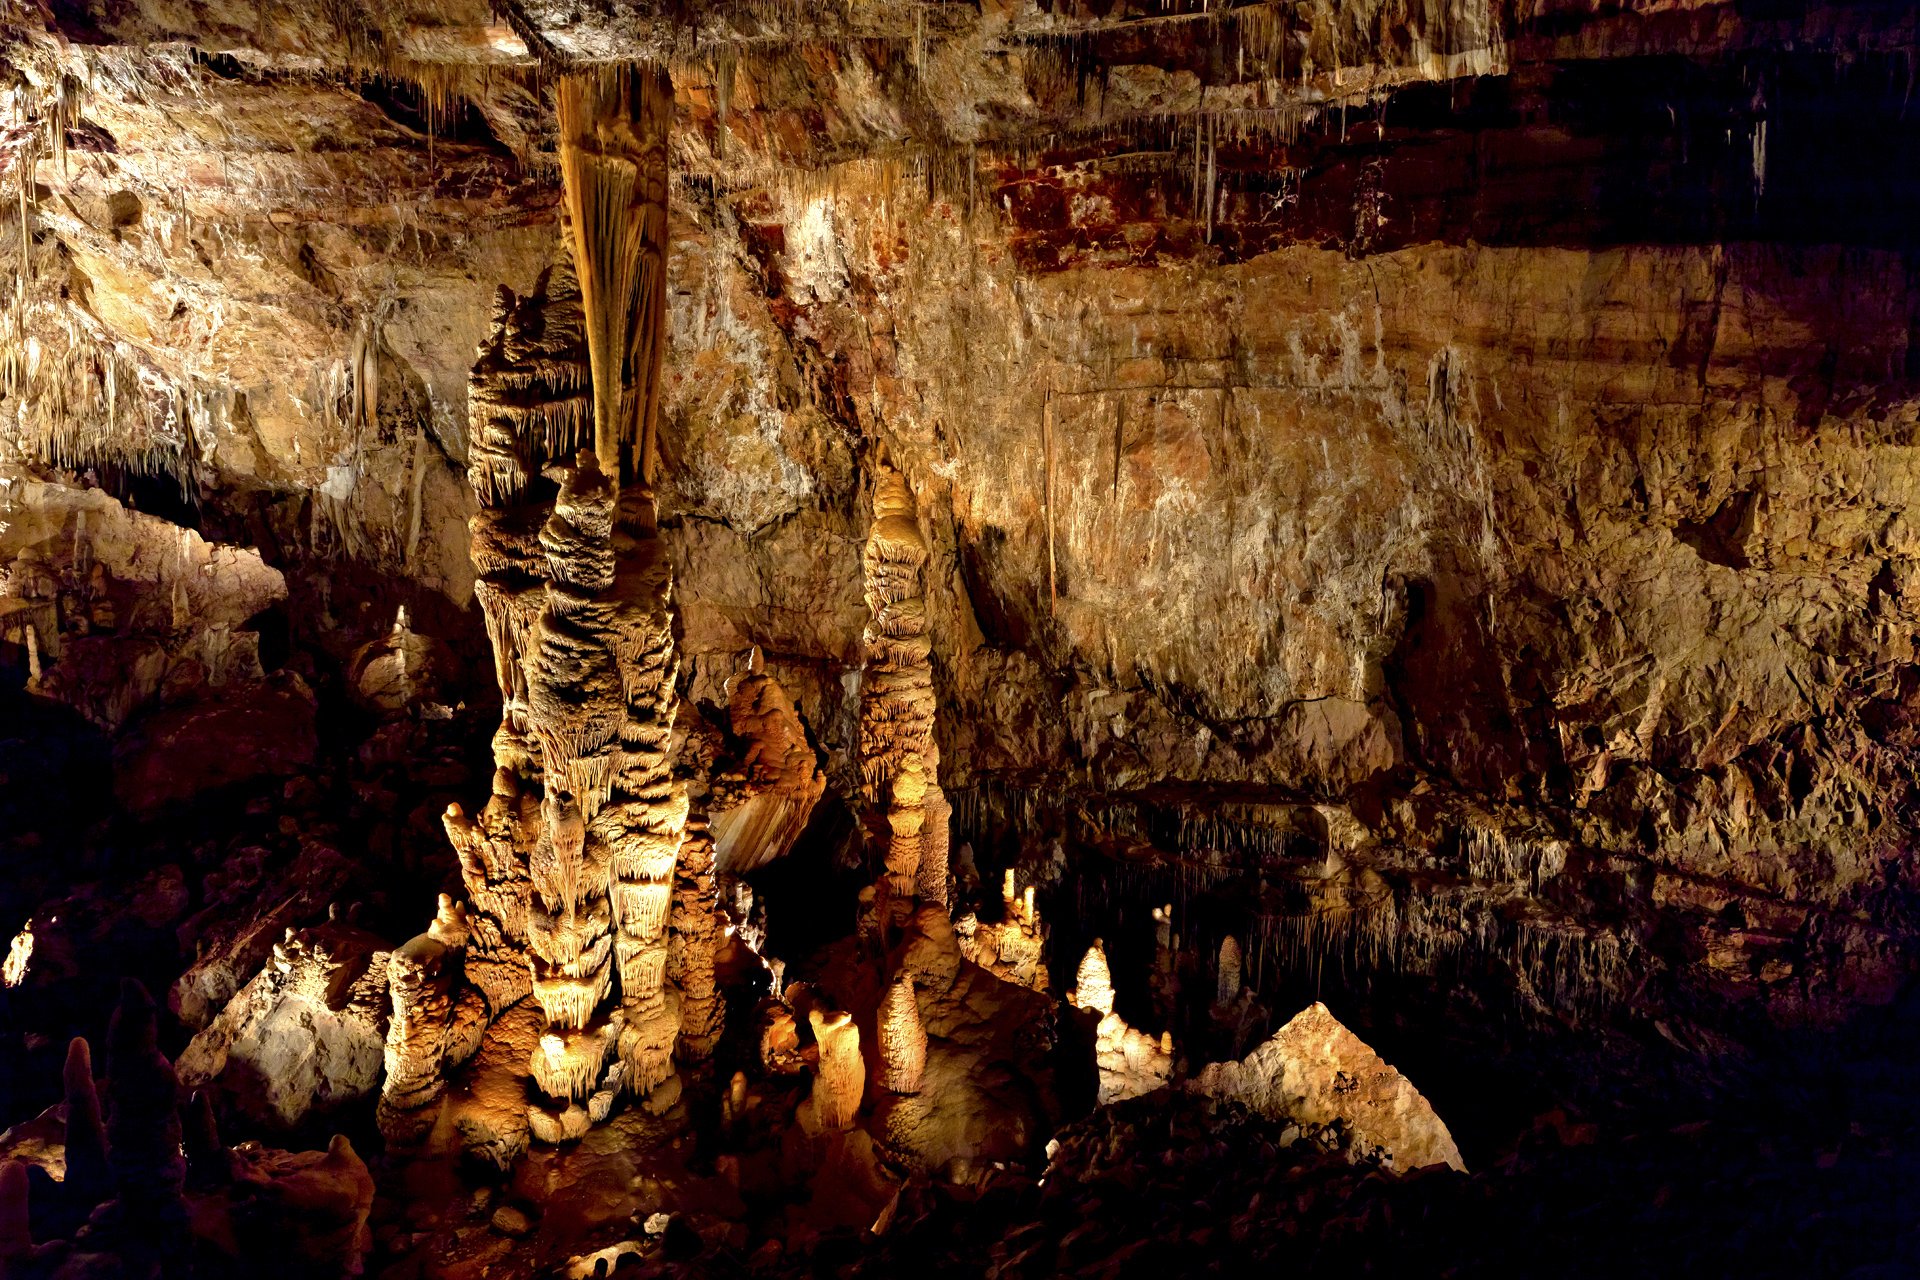  The Kubla Khan at Kartchner Caverns is the tallest and most massive column in Arizona, standing at 58 feet tall ( photo courtesy Arizona State Parks and Trails ).  